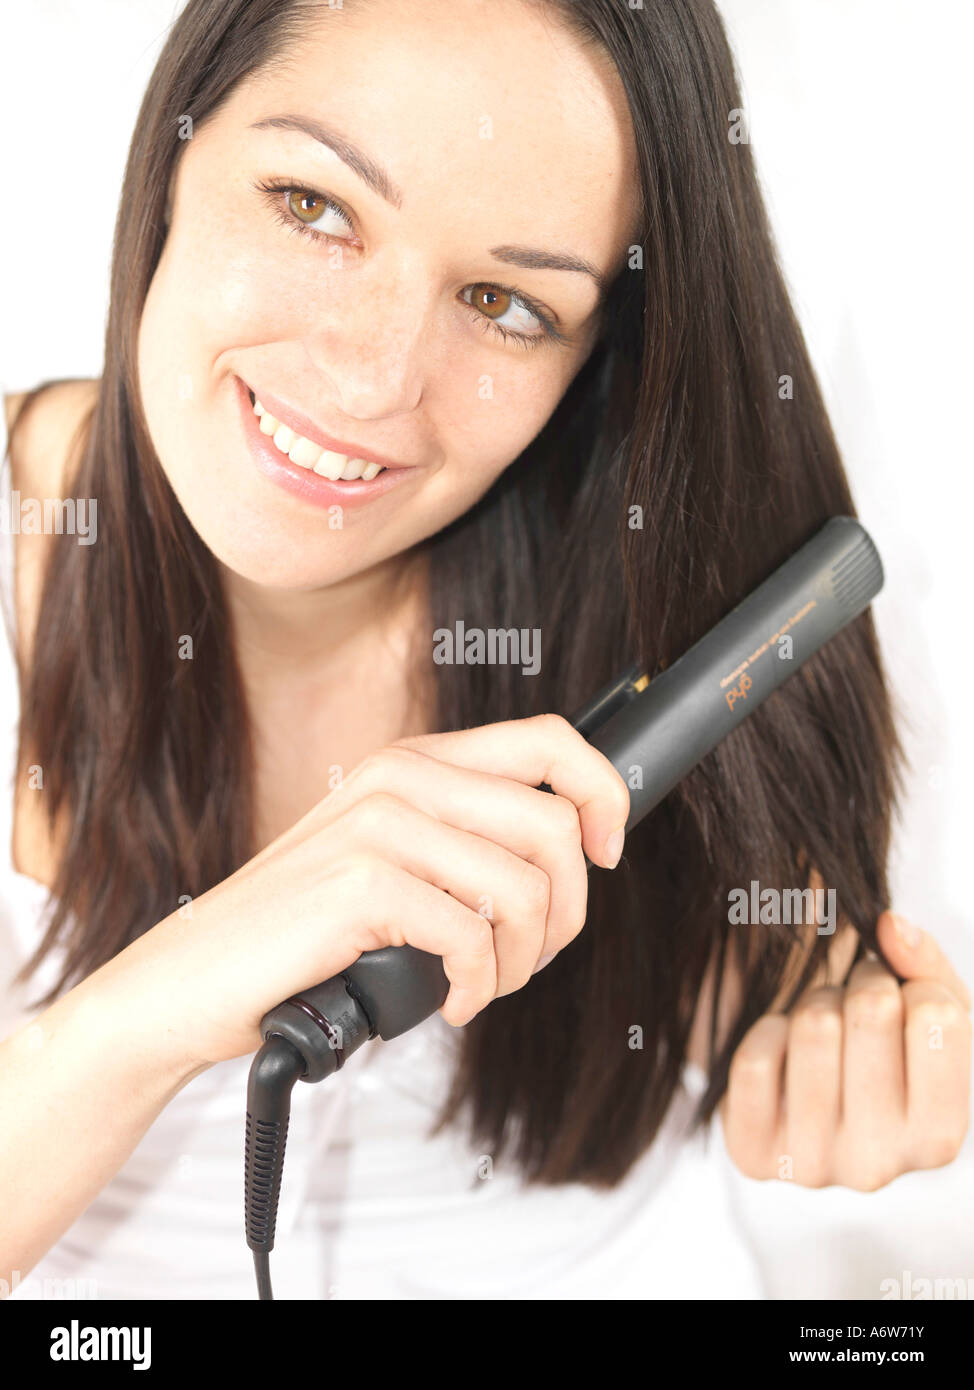 Young Woman Using Hair Straighteners Model Released Stock Photo